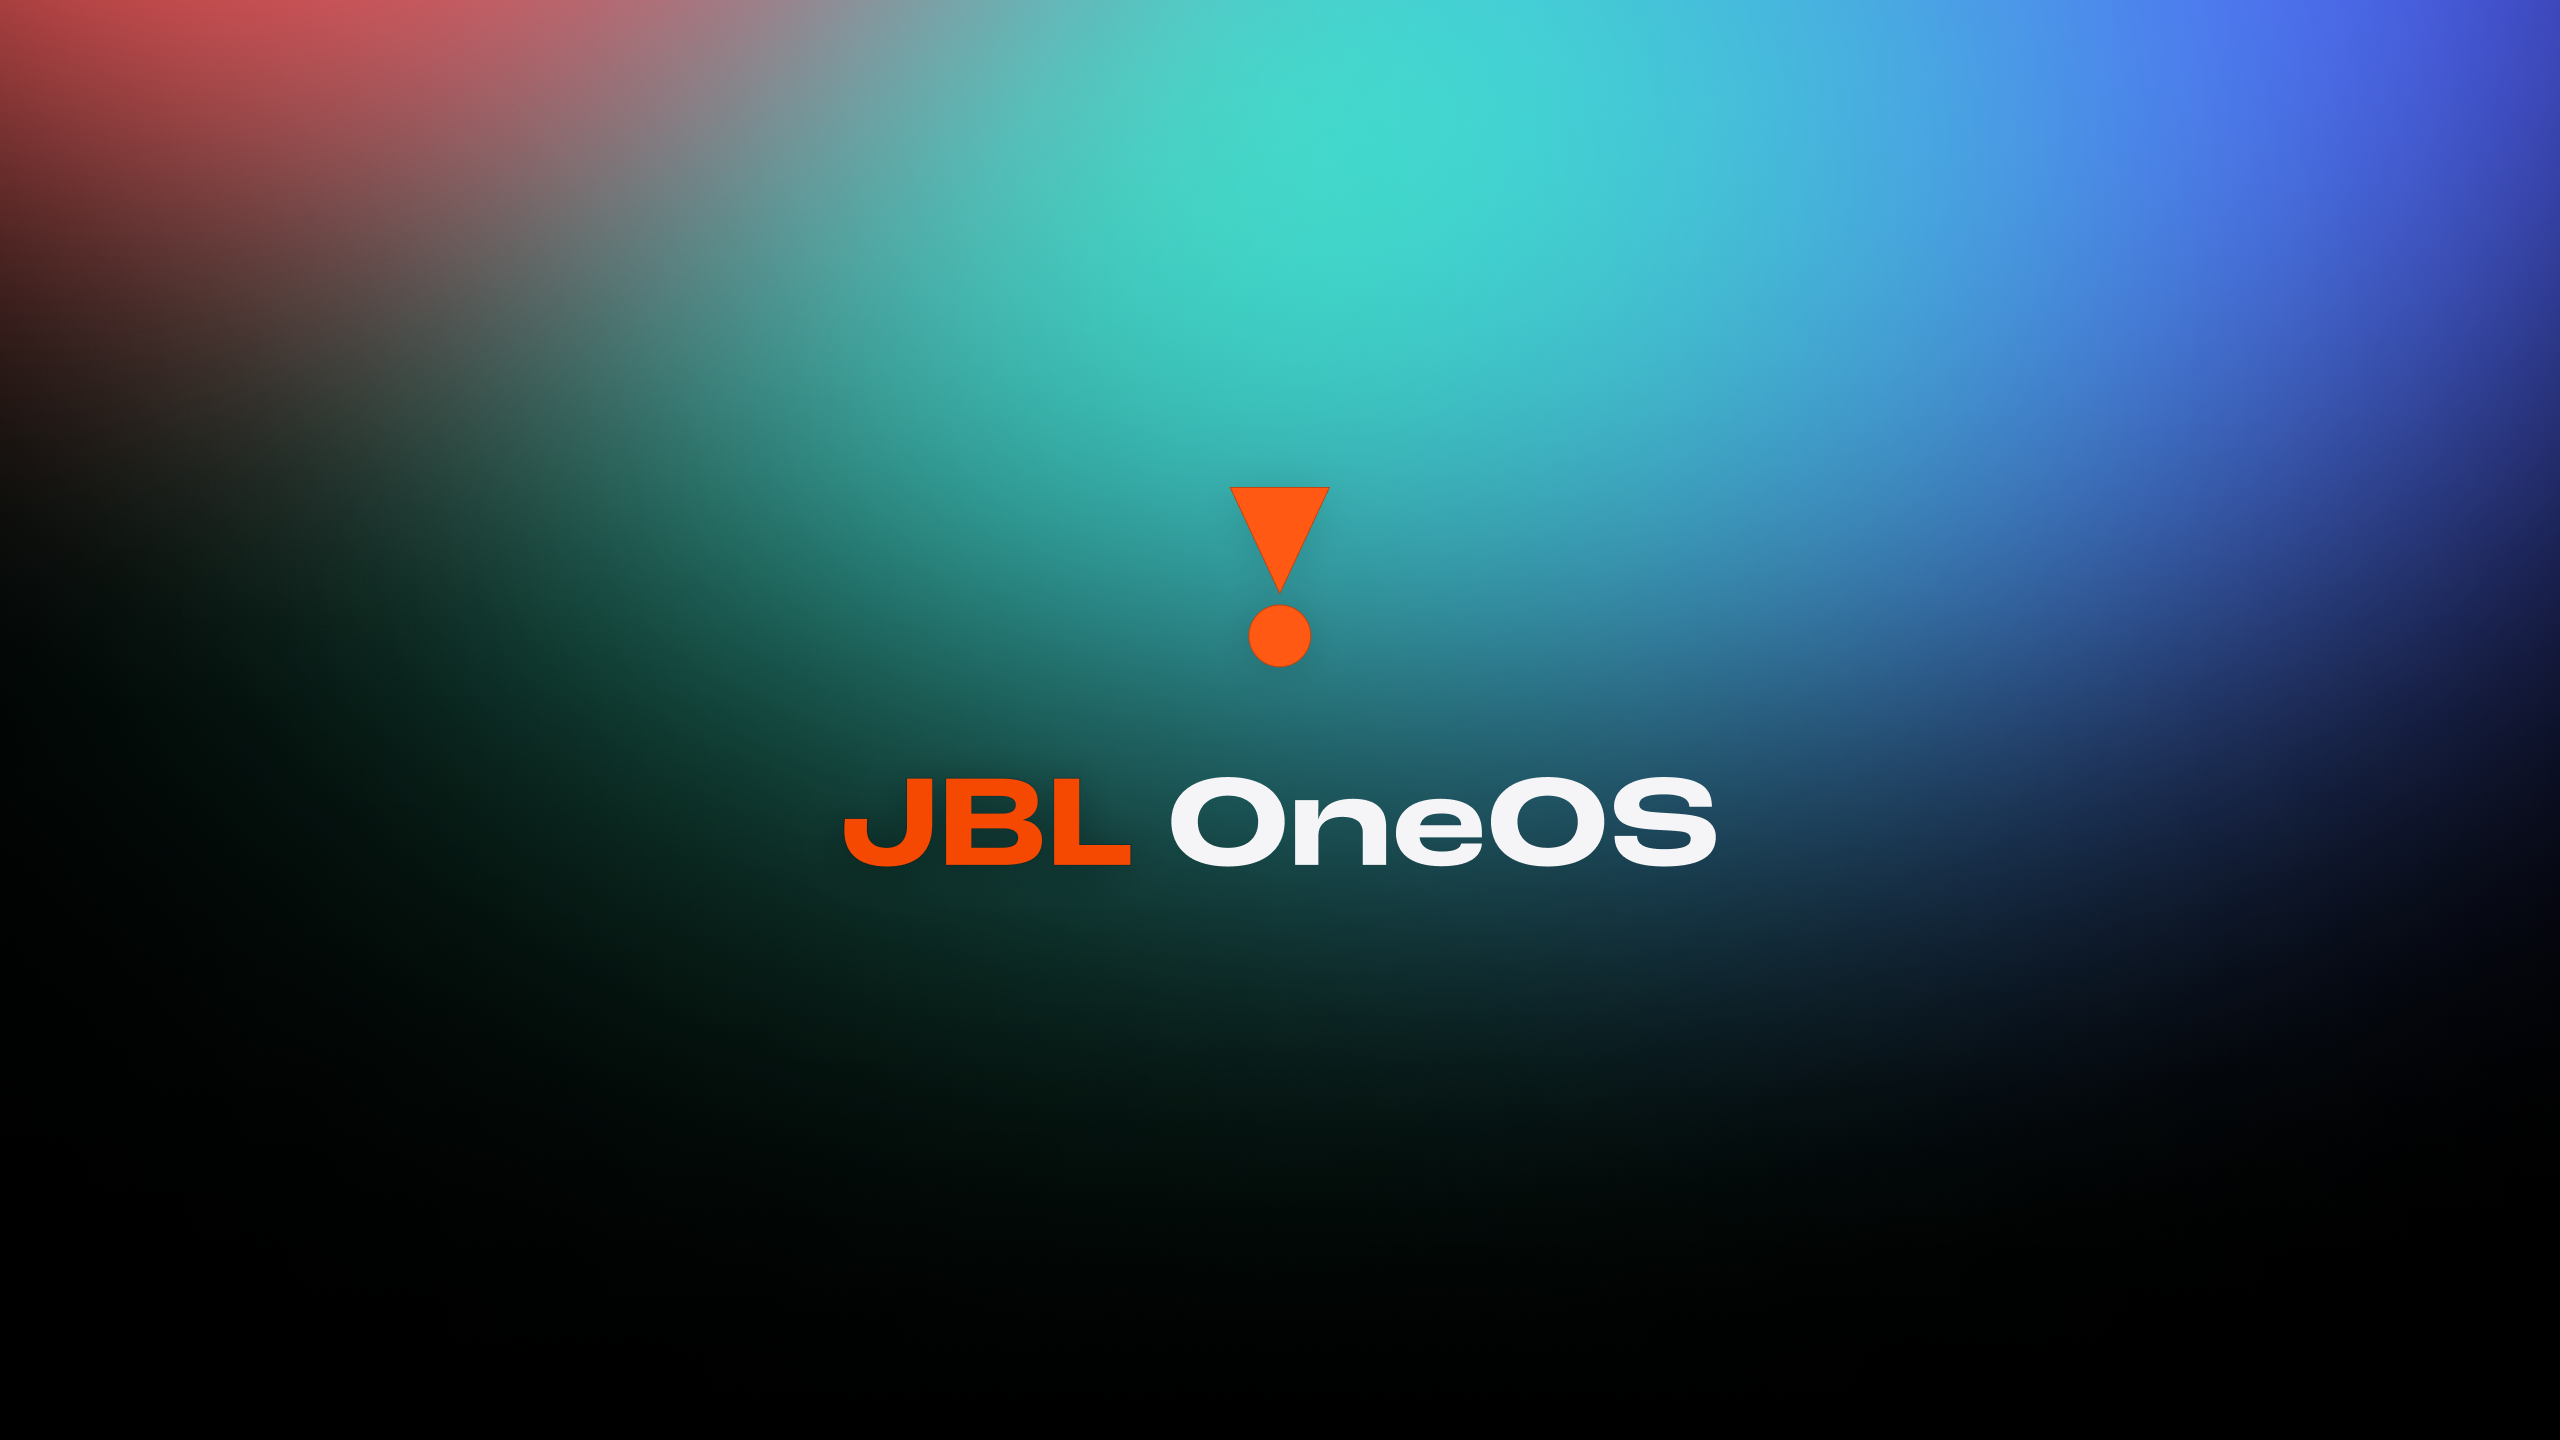 JBL OneOS eco system